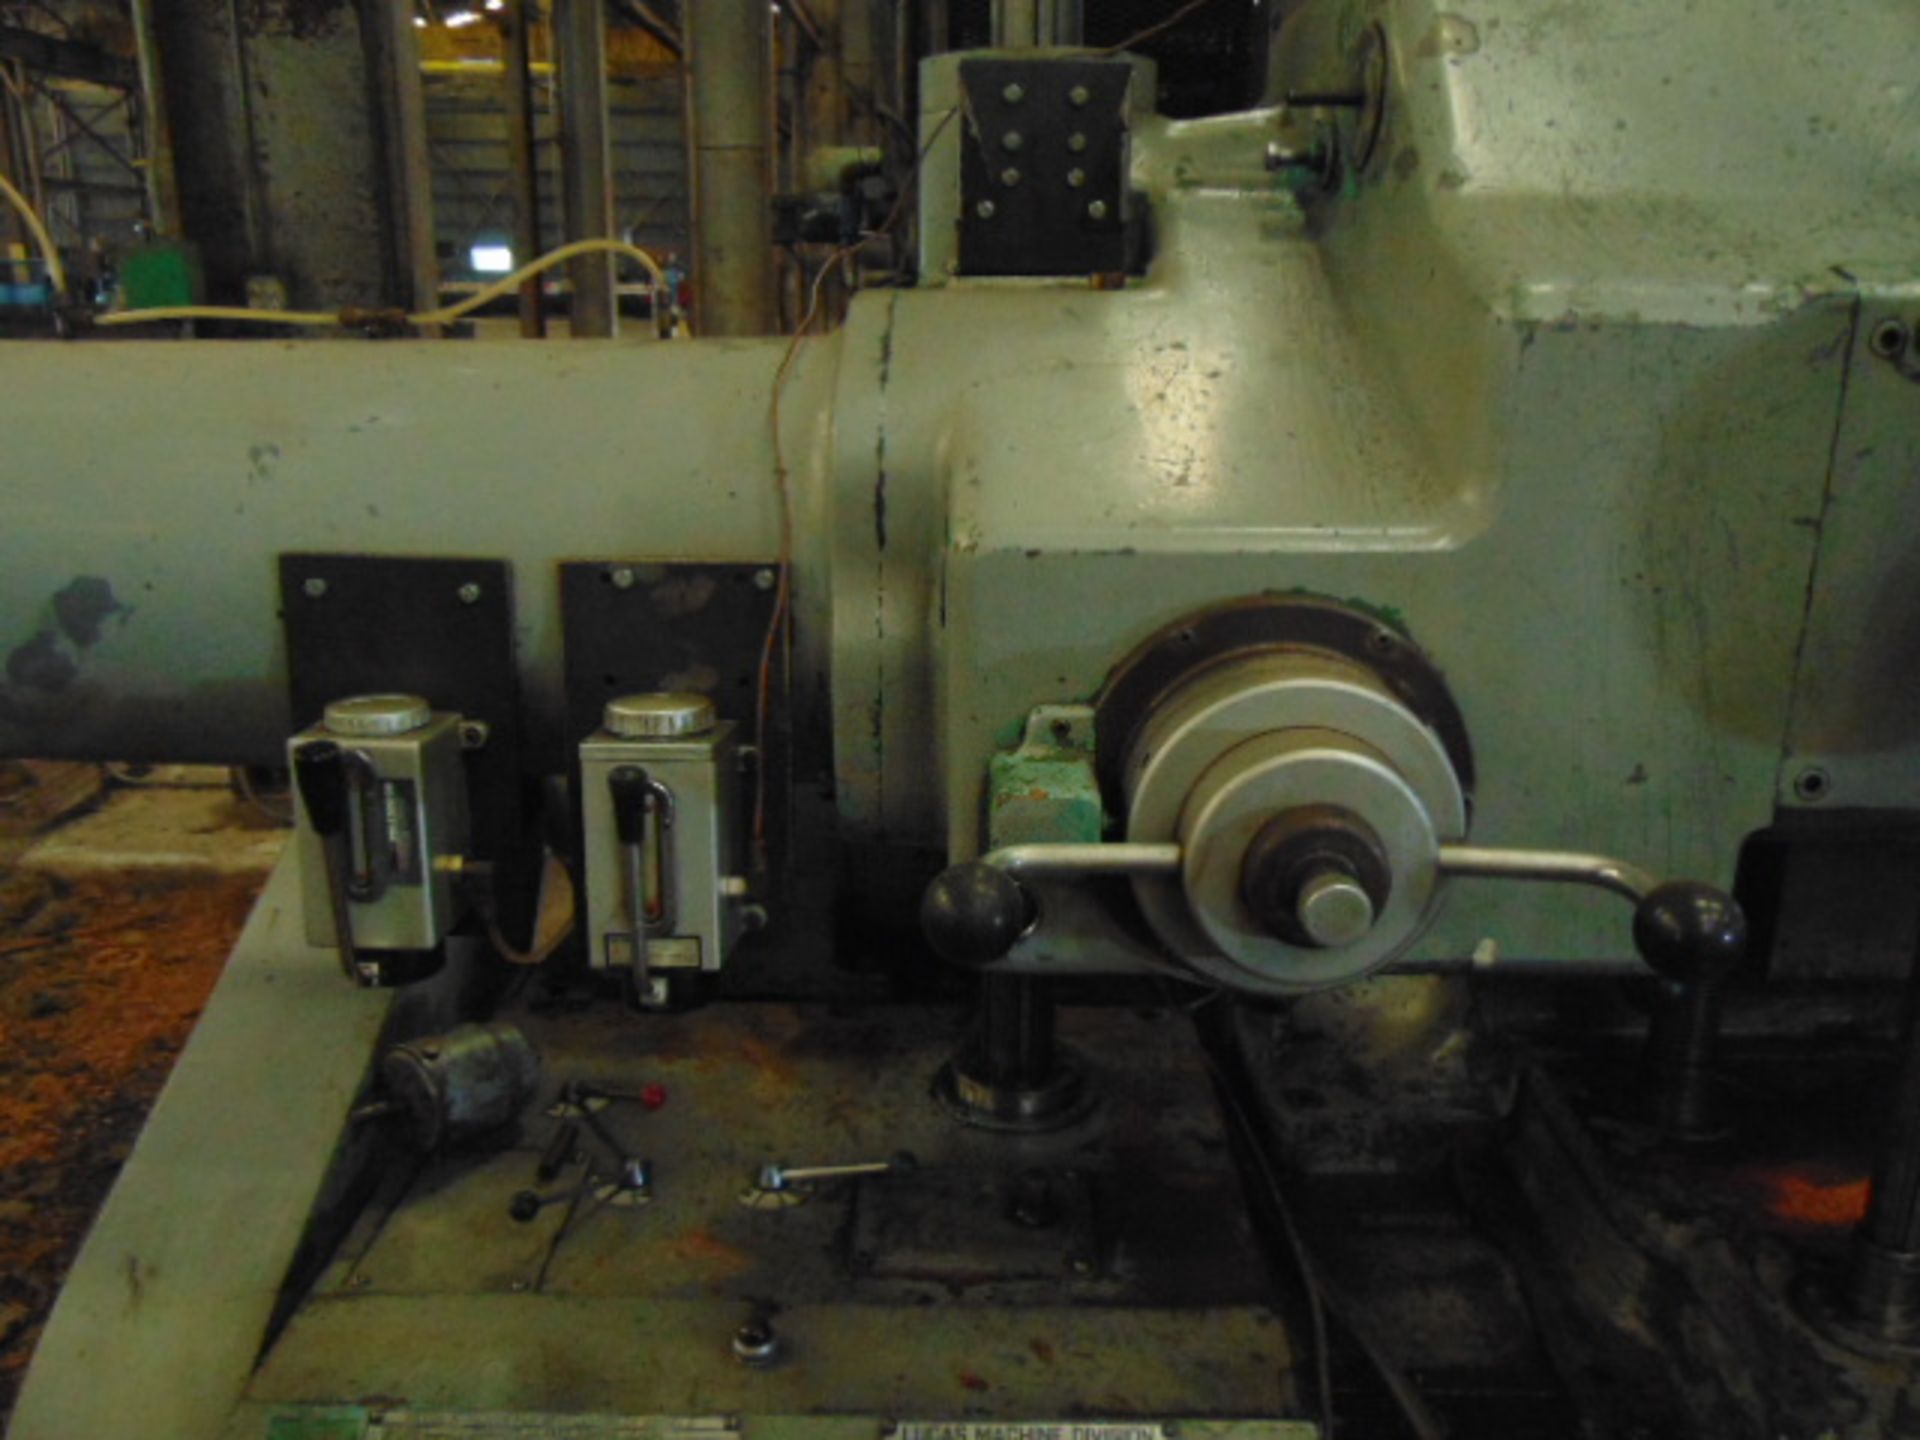 TABLE TYPE HORIZONTAL BORING MILL, LUCAS MDL. 428-60, 40" x 74" tbl., 60" cross travel, approx. - Image 7 of 16